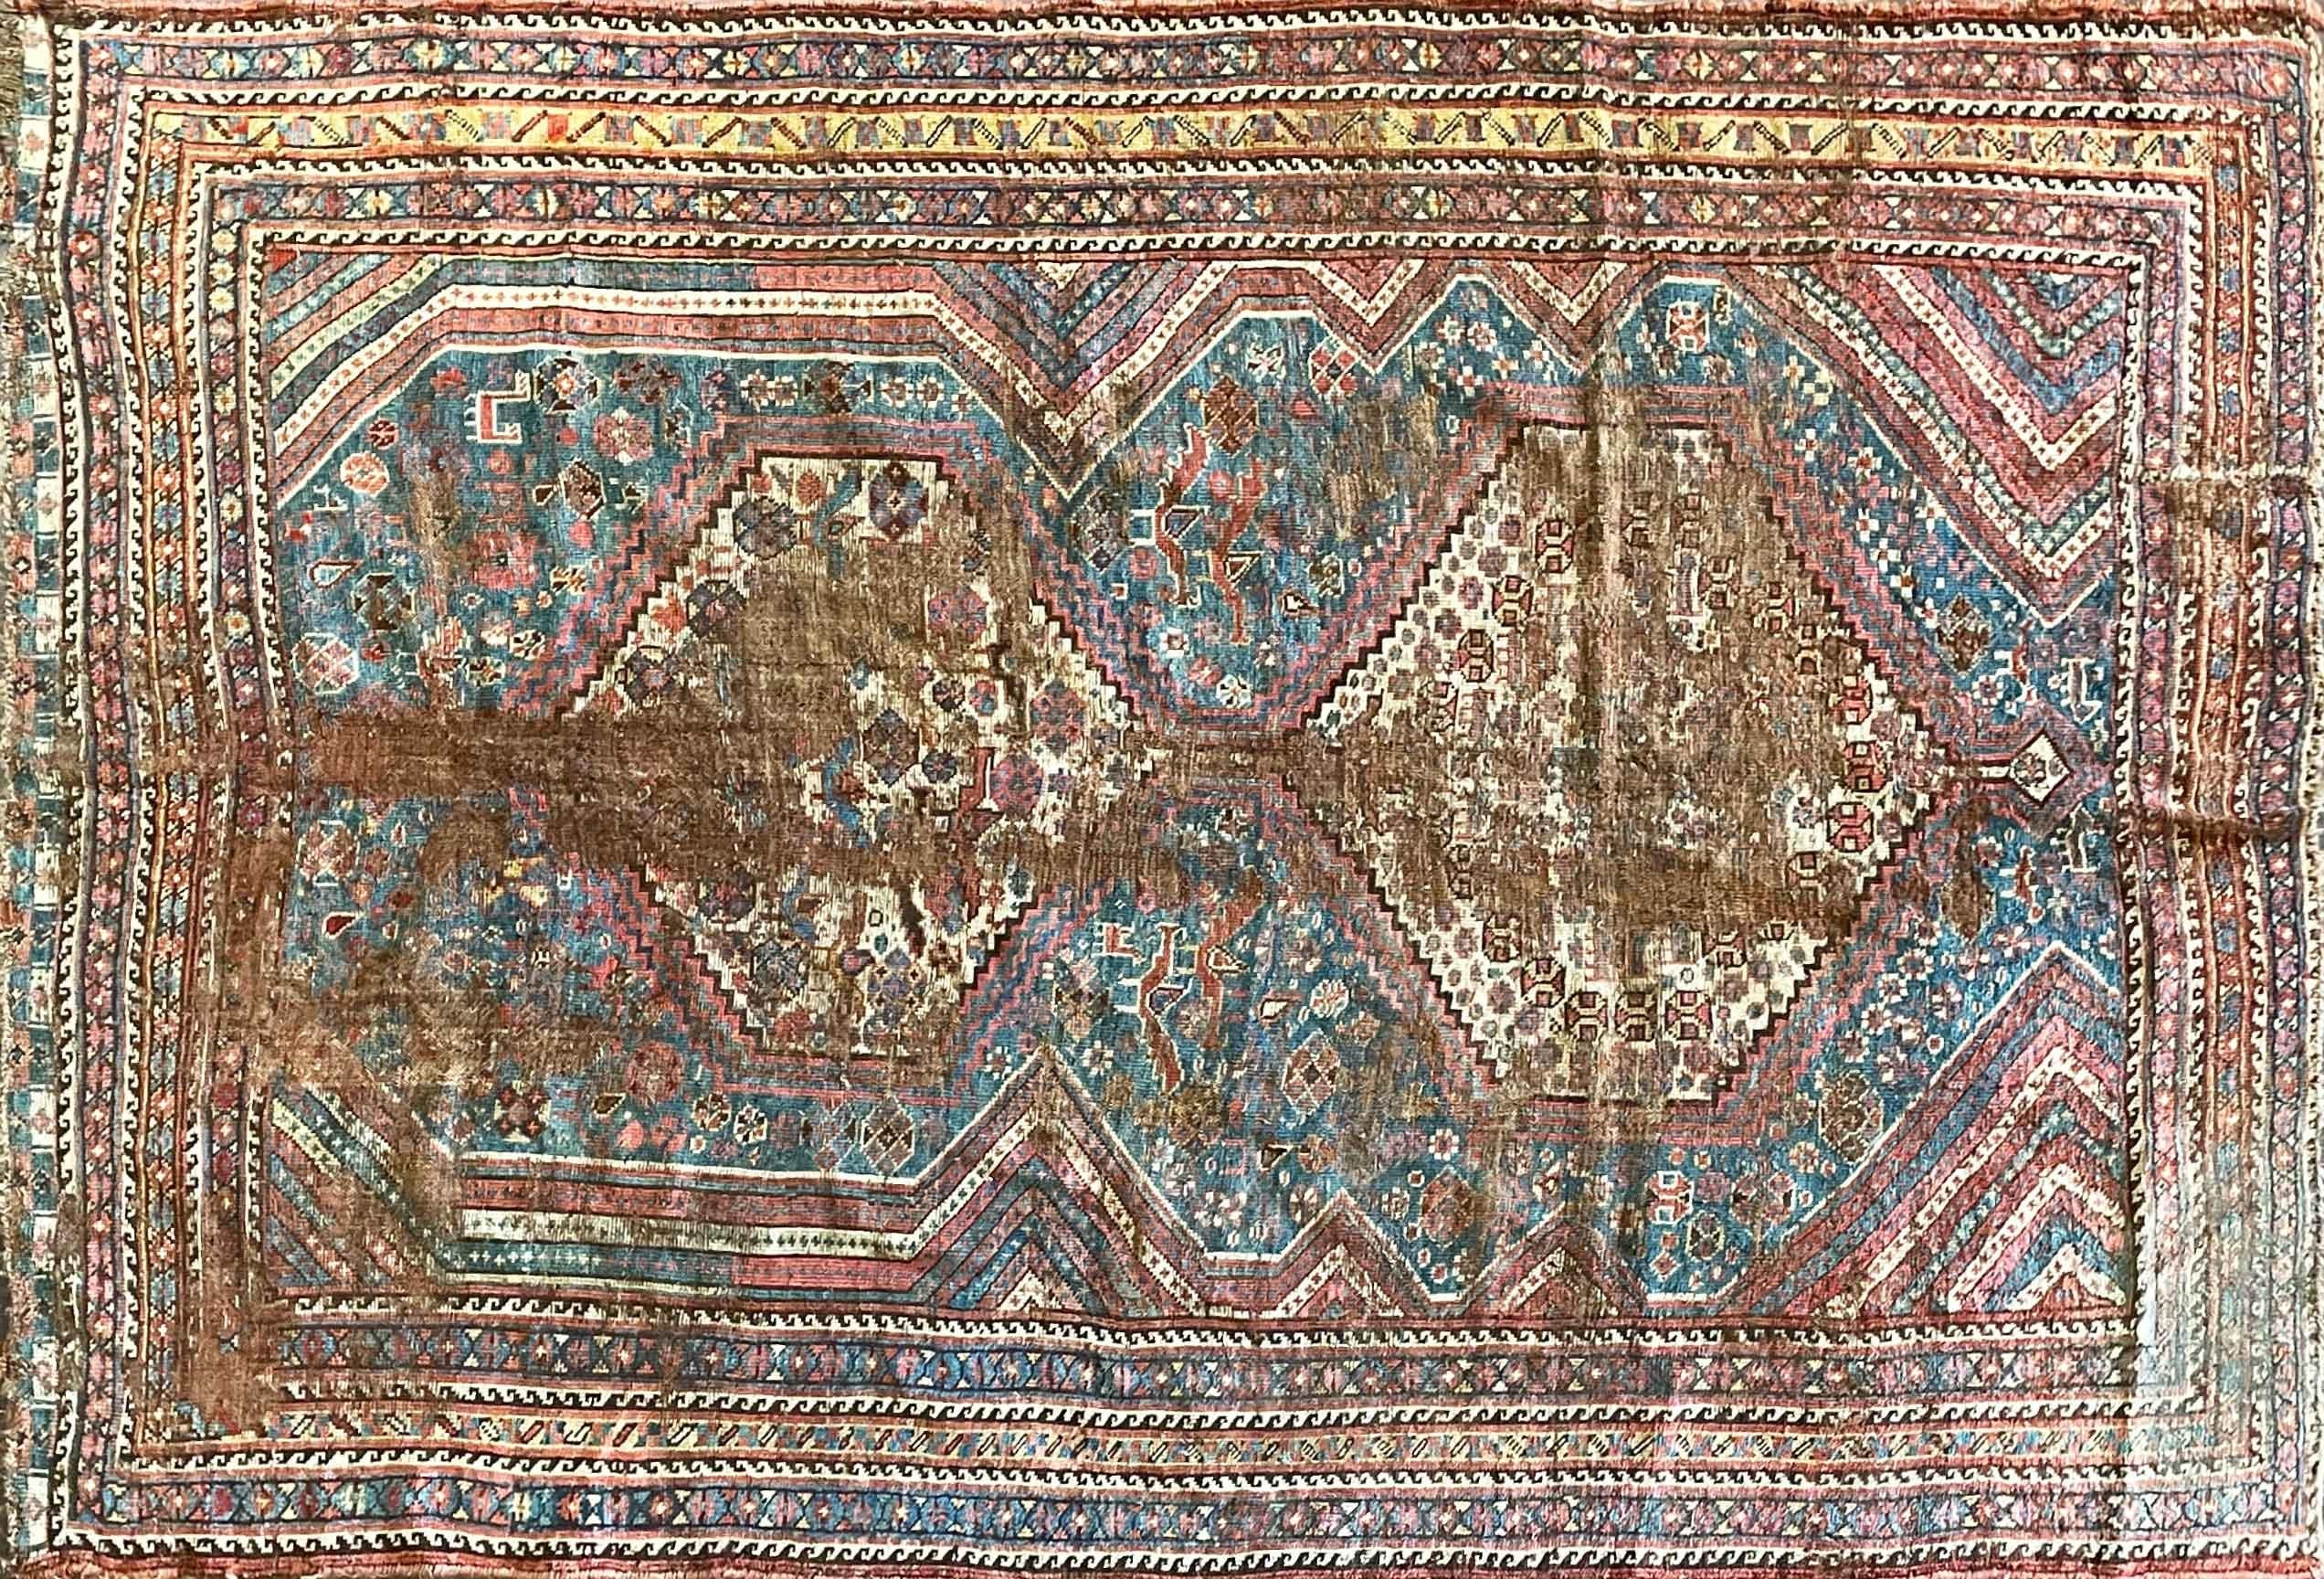 Exquisite Antique Persian Qashqai Rug - A True Masterpiece

Transport yourself to the rich heritage of Persian craftsmanship with this remarkable Antique Qashqai Rug, dating back to the 1870s and measuring 4'5